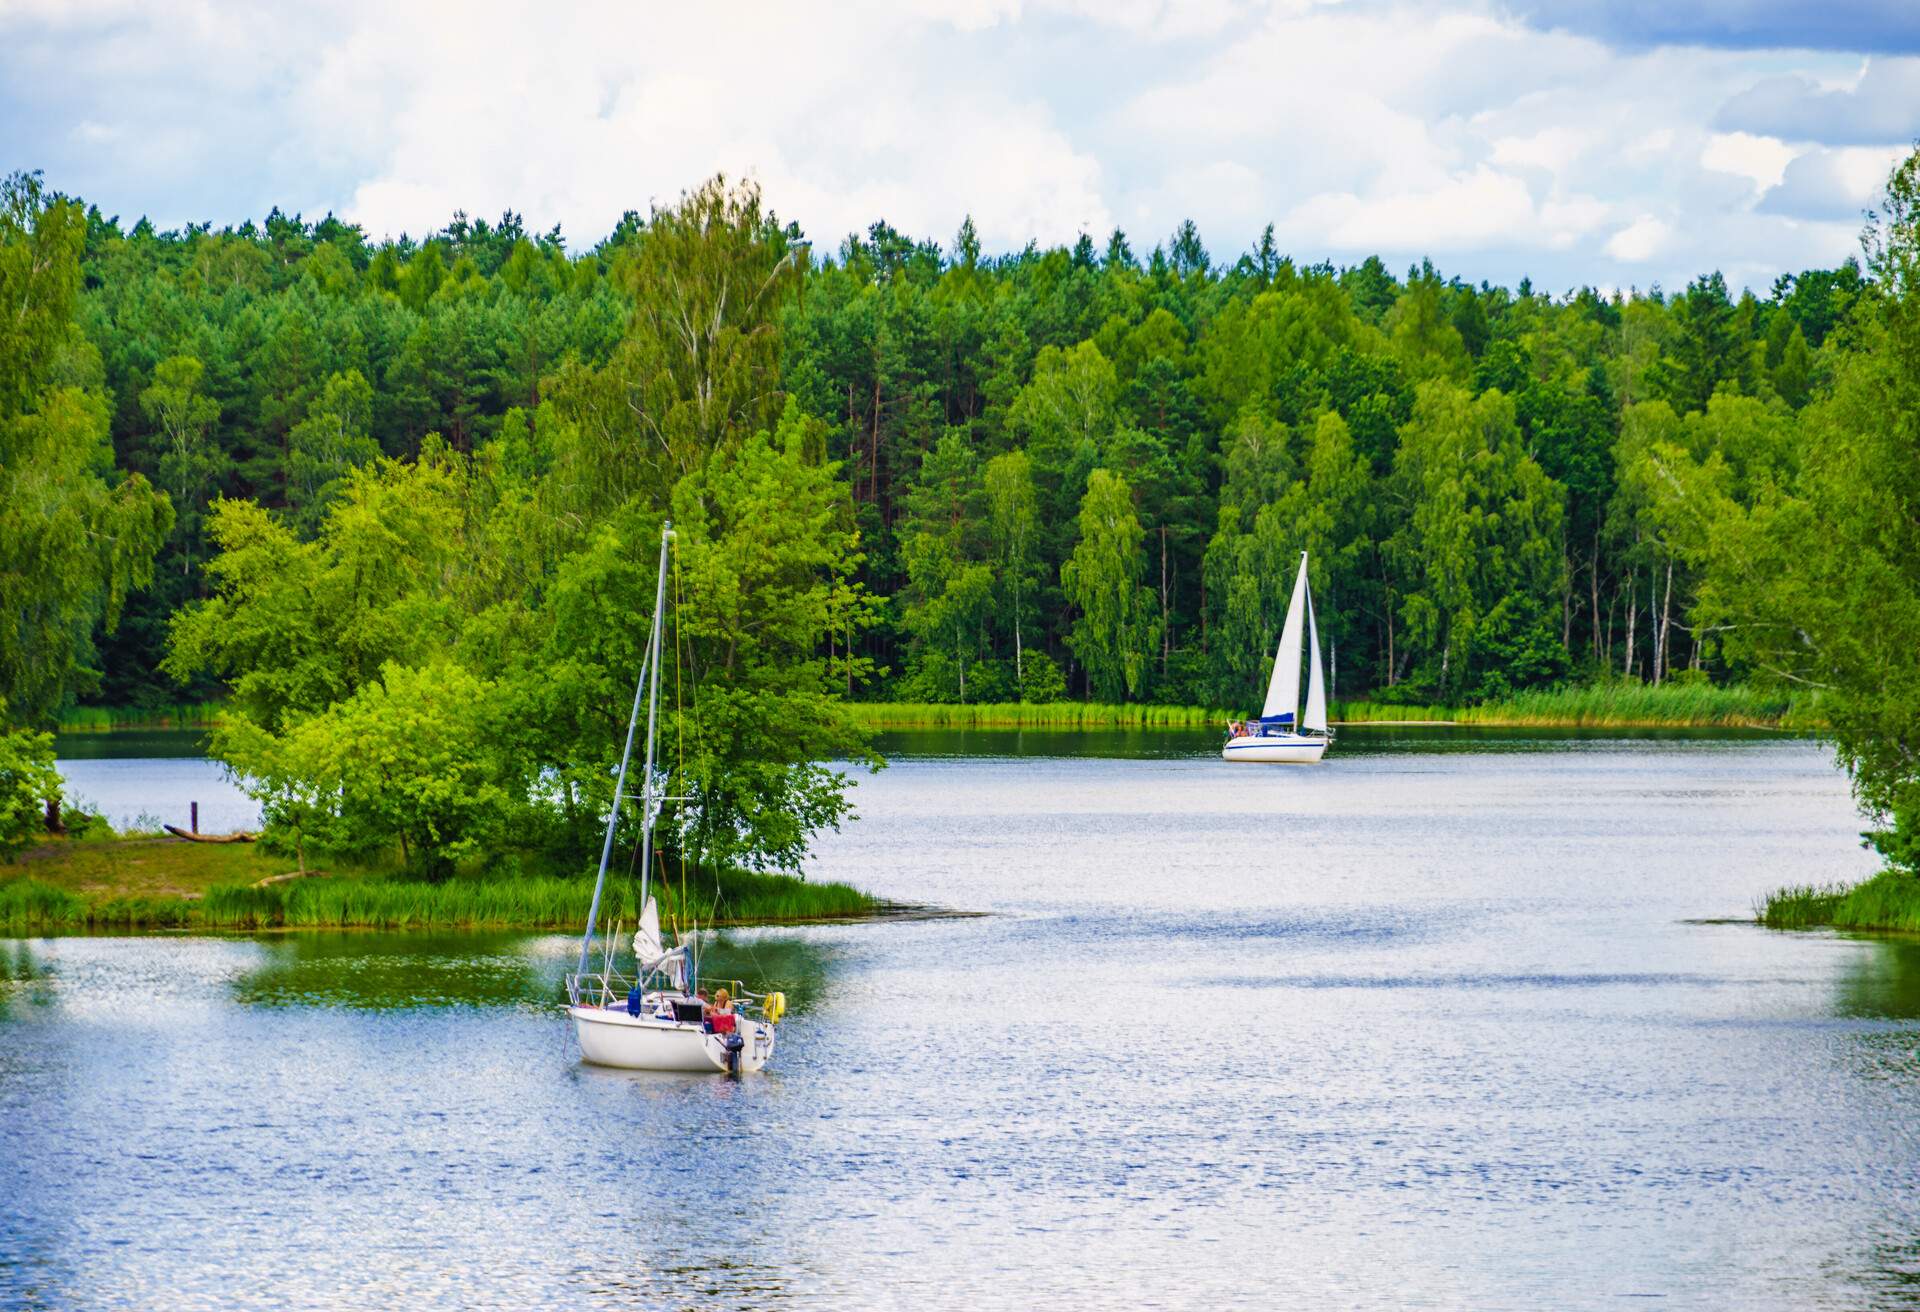 Boat yachts on lake during summer. Tuchola national park in Poland.